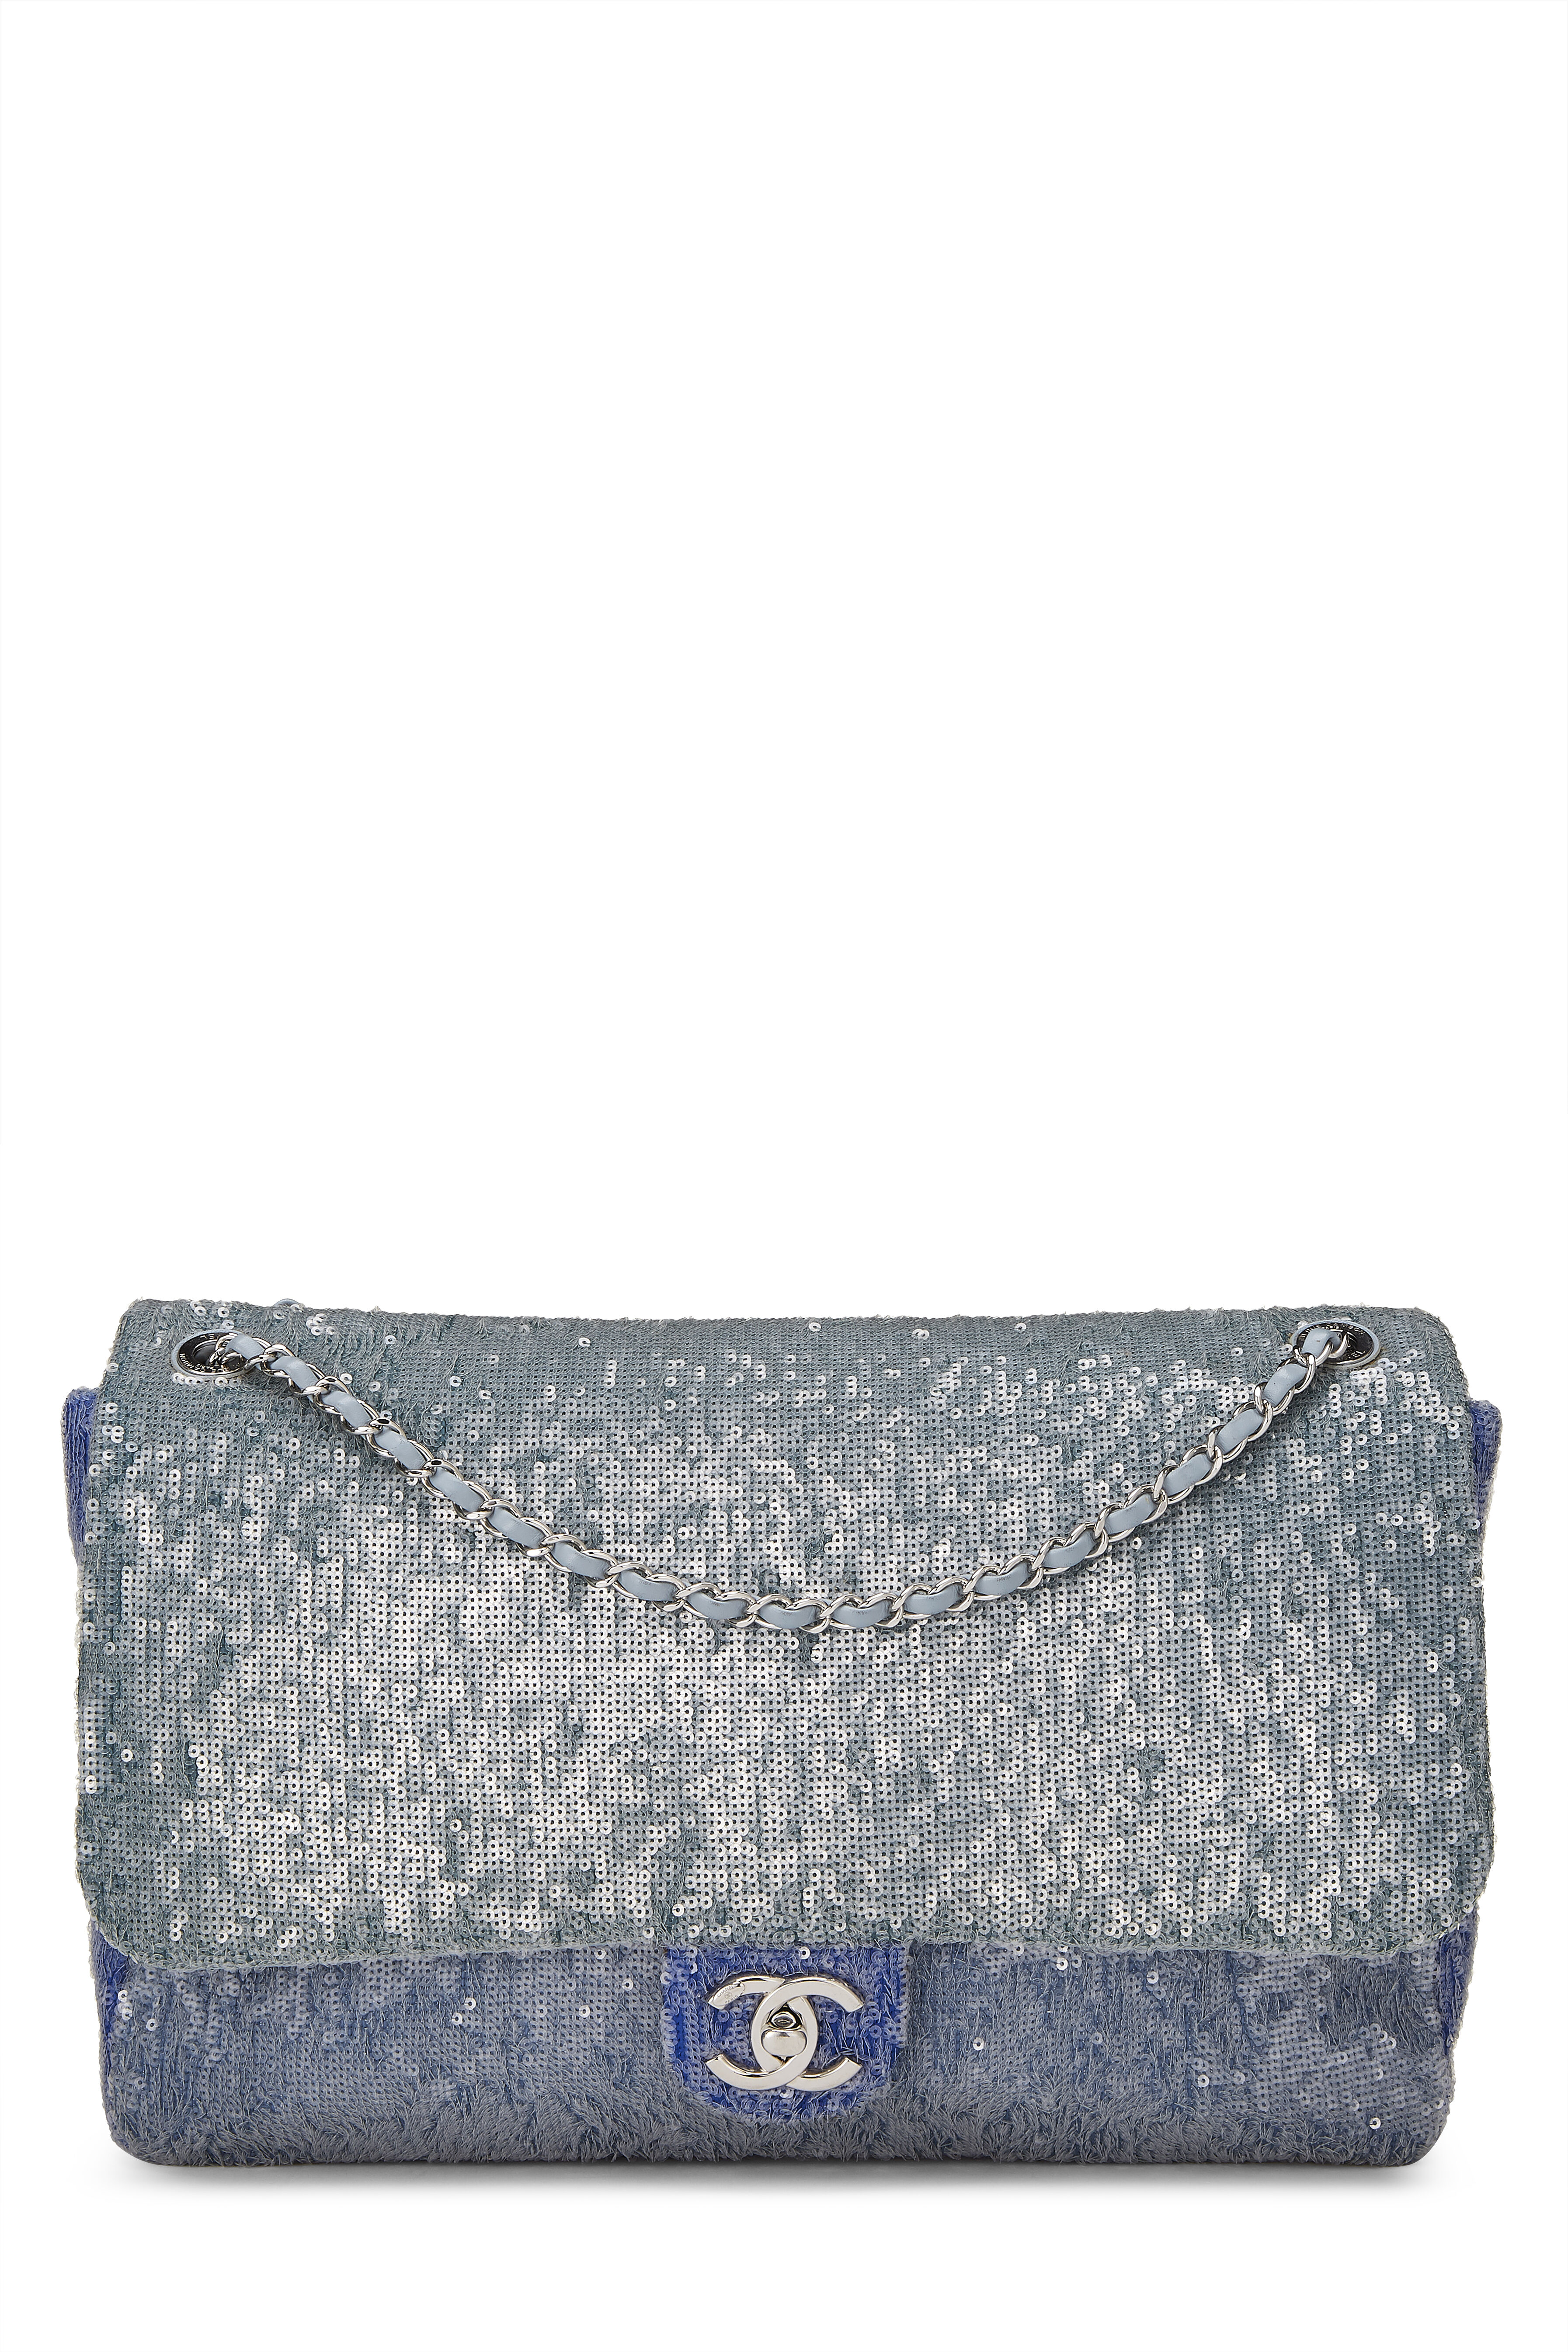 Chanel Blue Sequins Large Waterfall Flap Bag Chanel